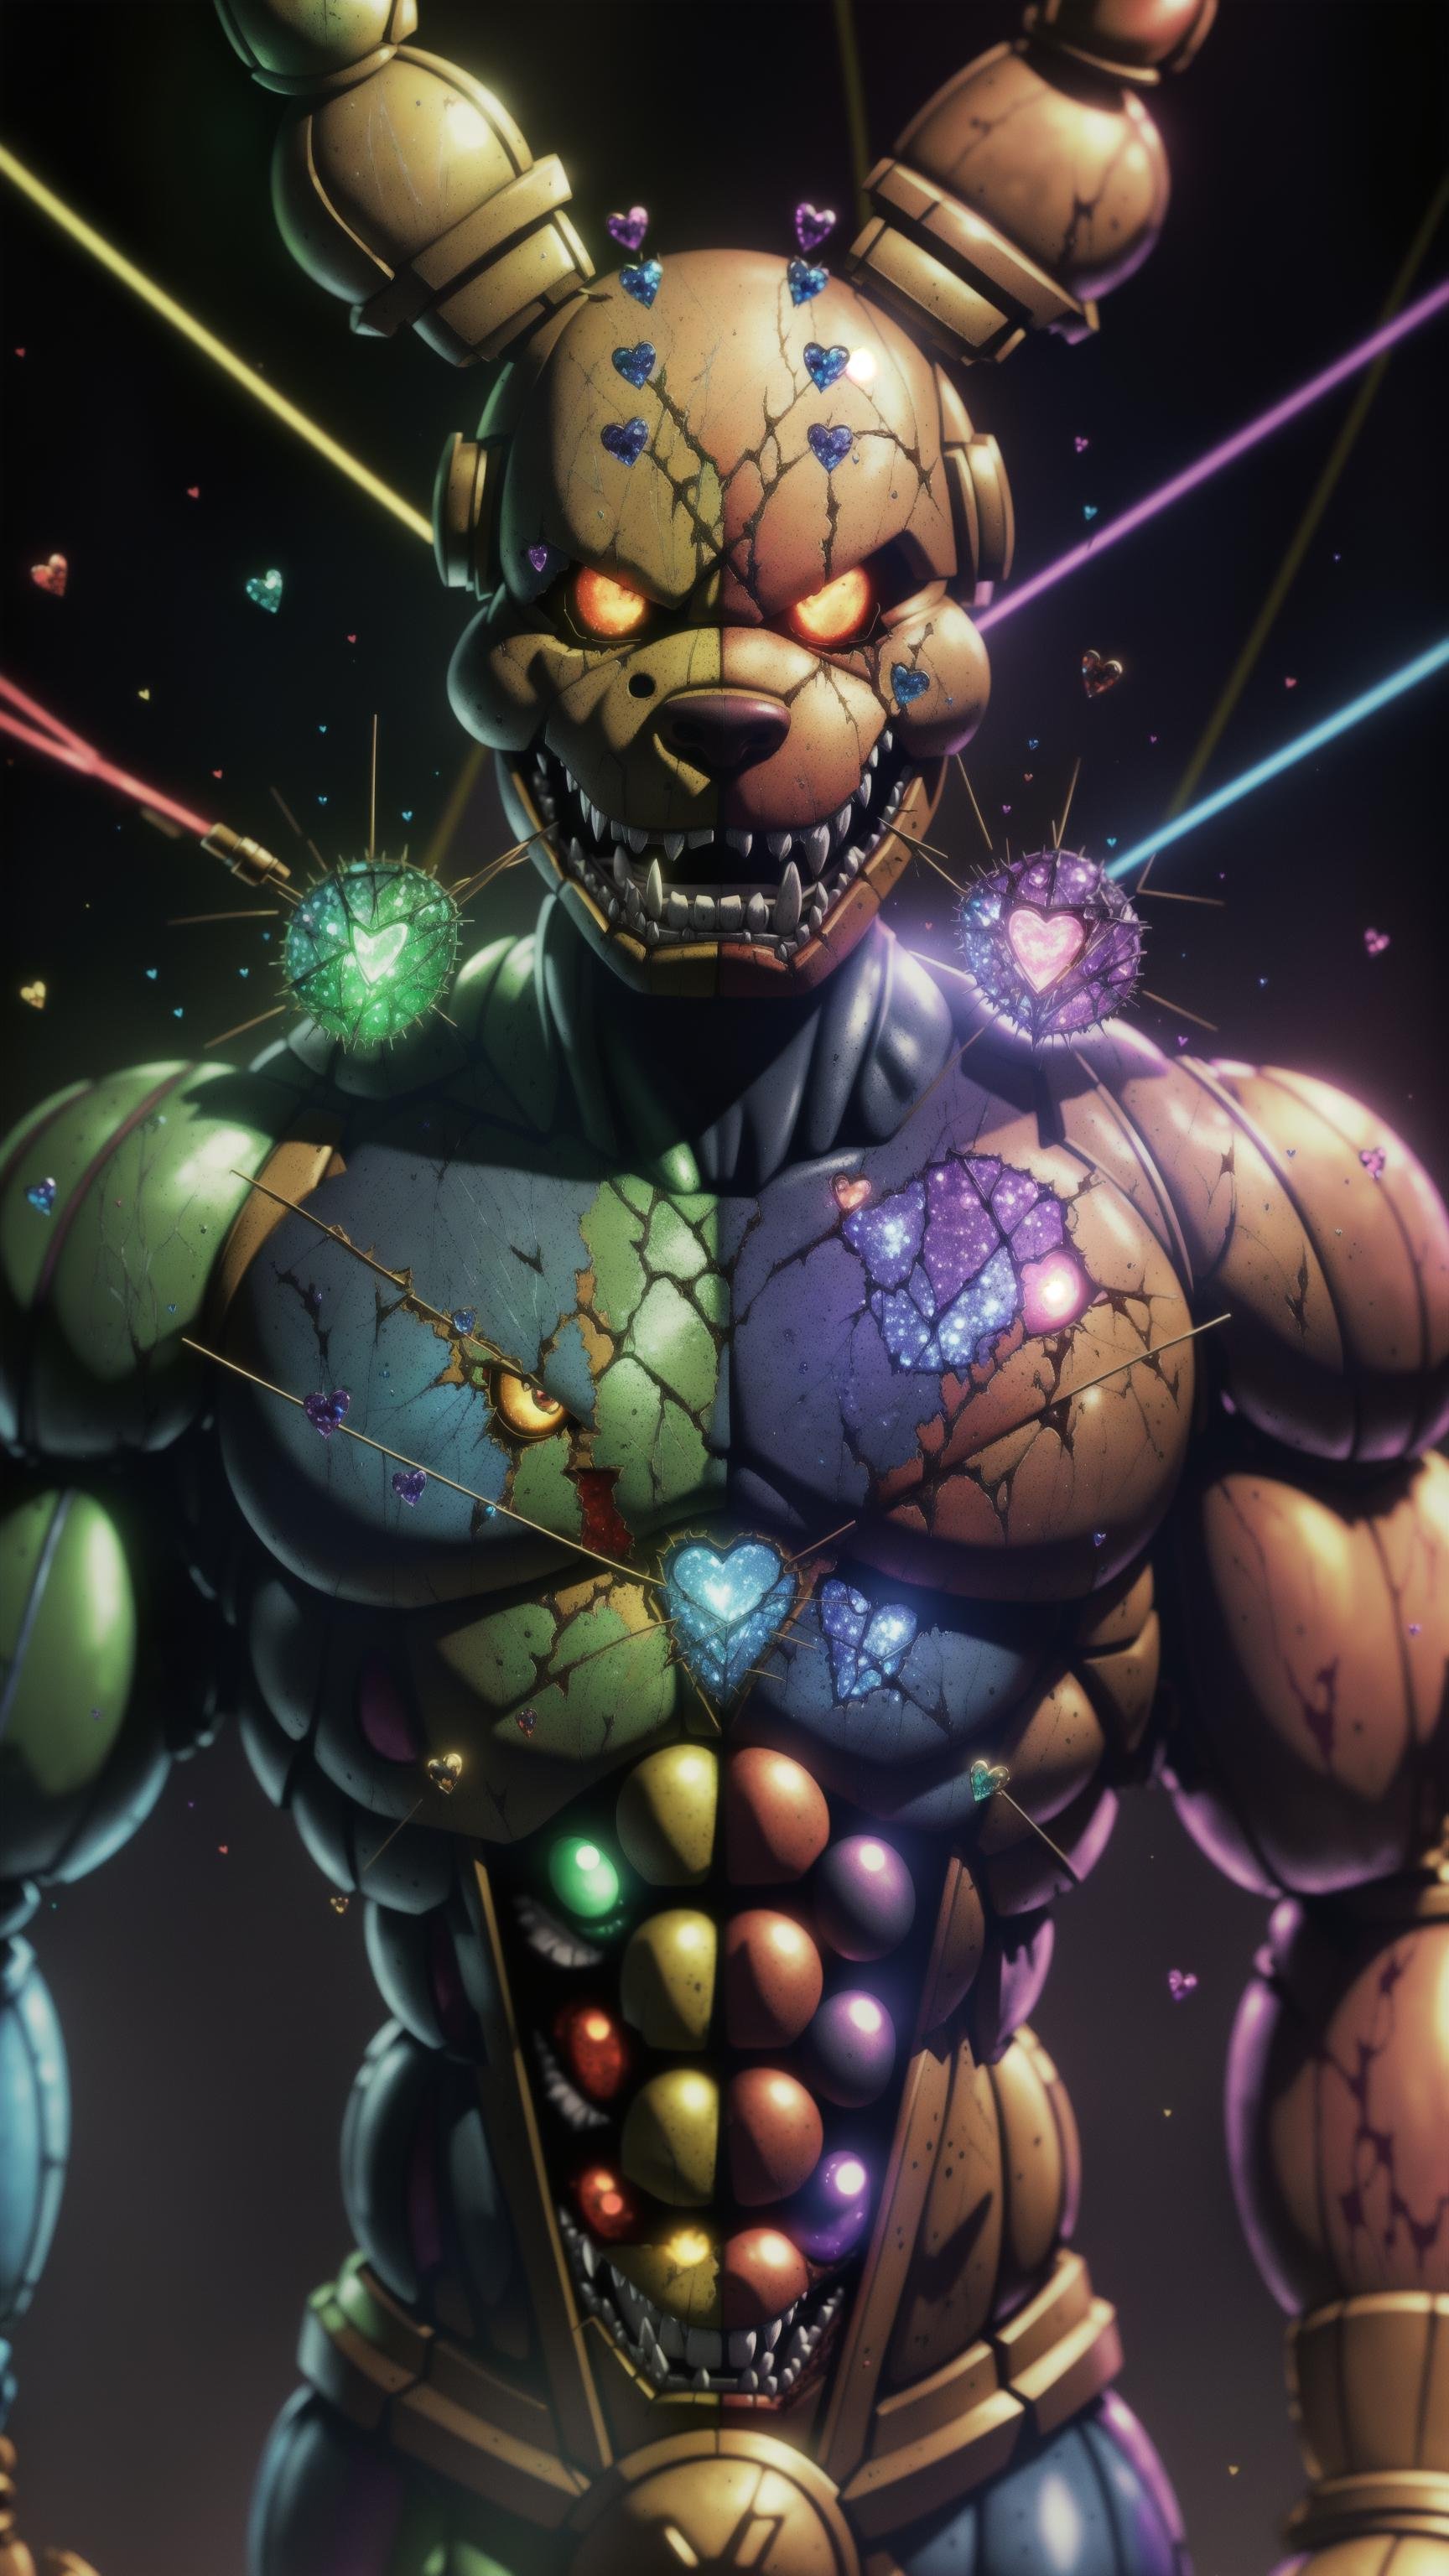 bonnie fnaf, rainbow springtrap, muscular animatronic, inside home, Springtrap, Nightmare Springtrap, realistic springtrap, fnaf springtrap, creepy springtrap, realistic springtrap, (rainbow bloody veins growing and intertwining out of the darkness), Springtrap potrait, oozing thick blue blood, sharp neon, veins growing and pumping blood, vascular networks growing, springtrap costume, green veins everywhere, (nailed wire), blood on body, (Muted colors:1.1), (Cross-hatching:1.1), (Infrared:1.2), Hypercube, ultra detailed, intricate, oil on canvas, ((dry brush, ultra sharp)), (surrealism:1.1), (disturbing:1.1), sparks, dark atmosphere, RTX, post processing, fnaf pizzeria, rainbow skin, ultra detail, freddy fazbear, springtrap Five Nights at Freddy's, a lot of blood, fnaf animatronic, nightmare animatronic, golden freddy, detailed background, pizzeria background, beksinski style,  heart on chest, lubrified body, body reflections, bloody, (shattered glass:1.3), cosmic space background, ethereal atmosphere, dynamic pose, black hole in the background, stars, space, lensflare, rim lighting, backlighting, detailed hands, muscular hands